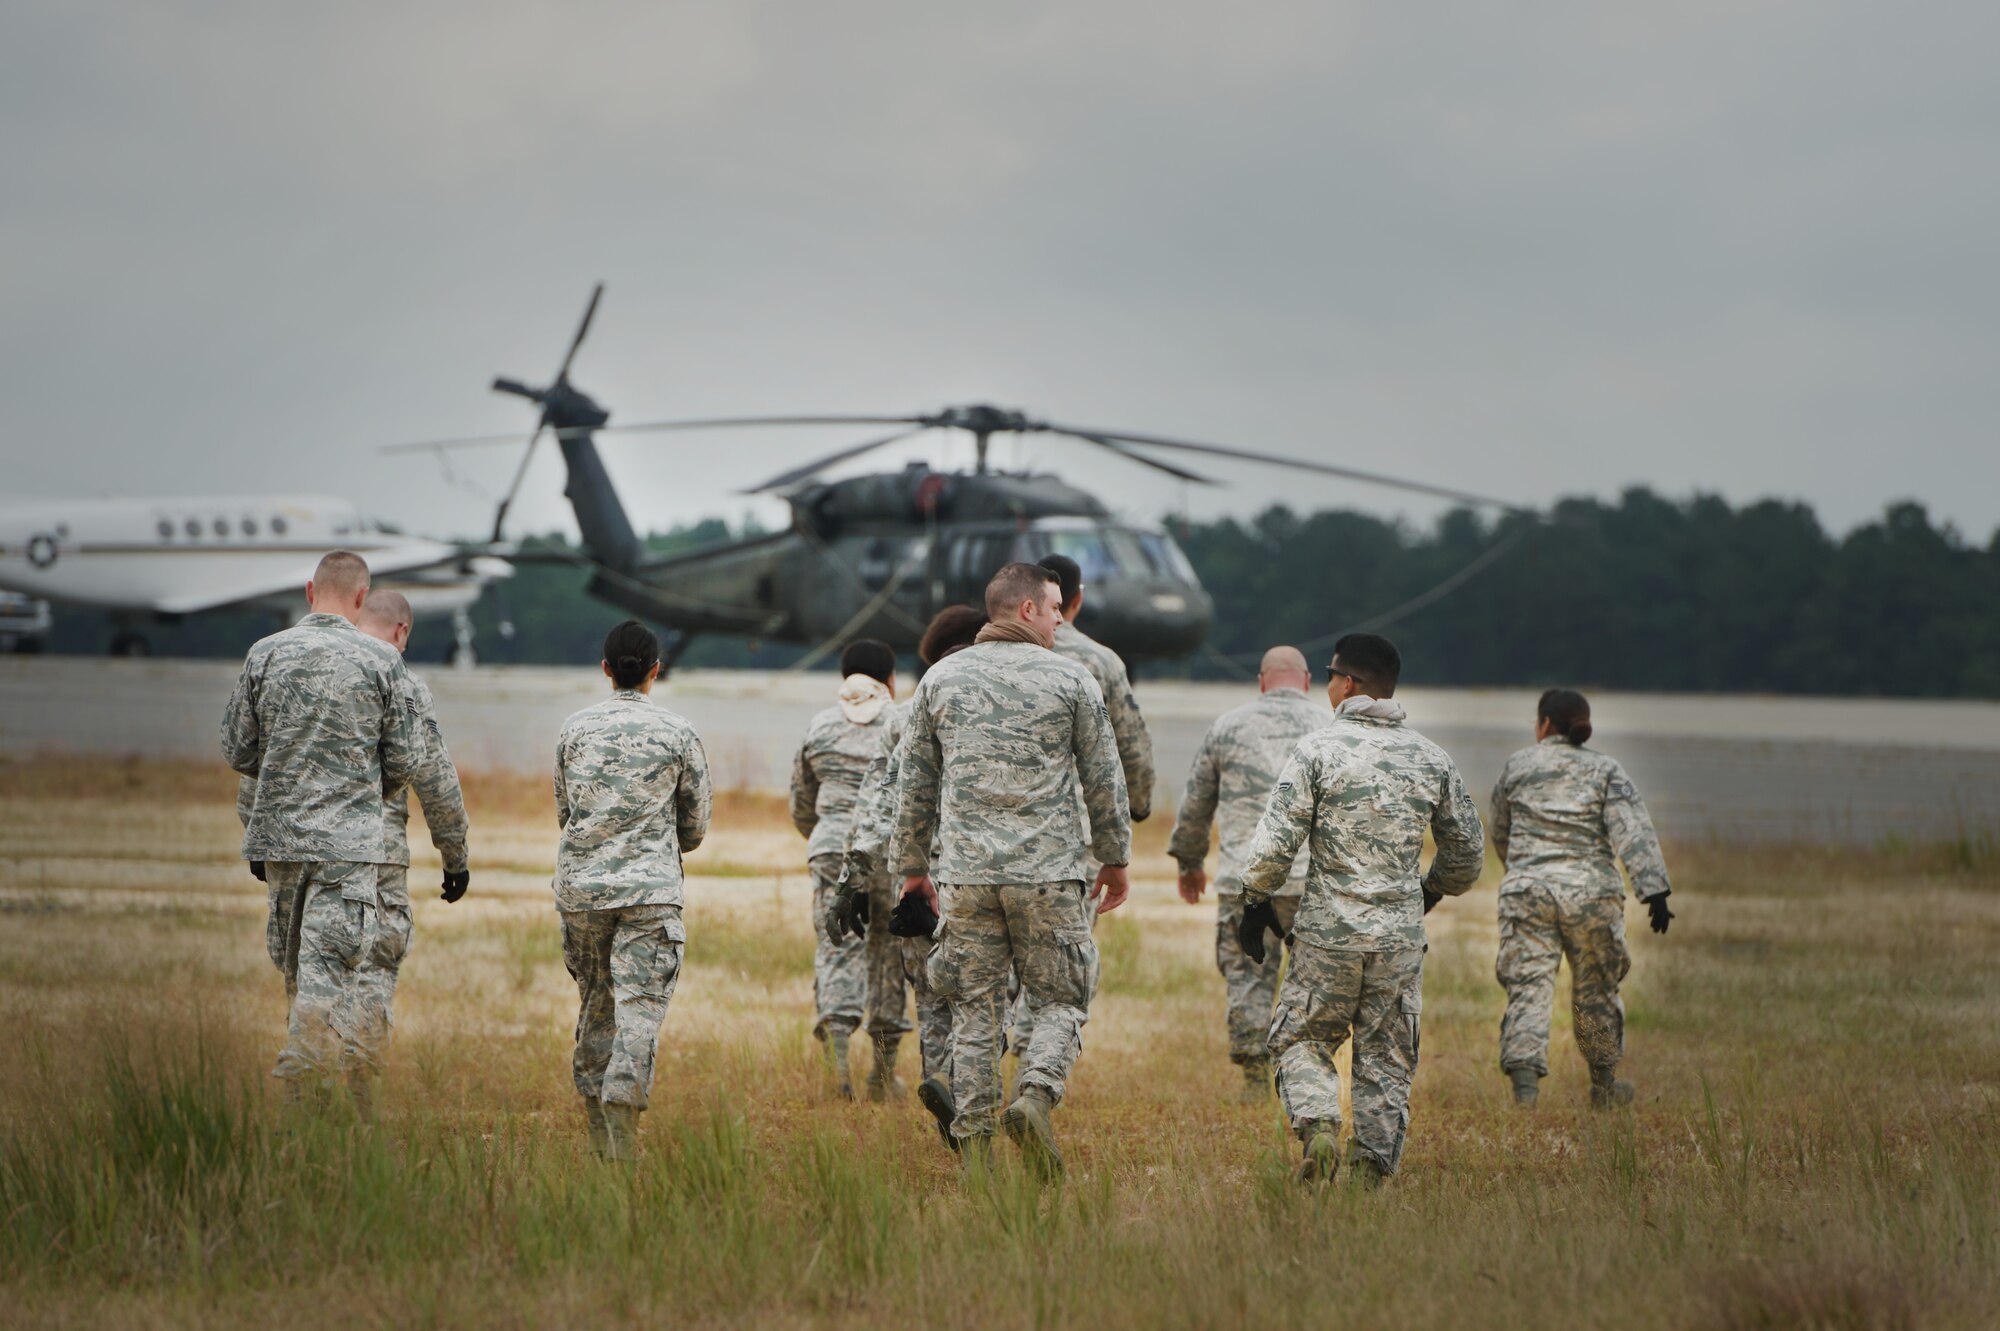 JOINT BASE MCGUIRE-DIX-LAKEHURST, N.J. -- Members of the 621st Contingency Response Wing make their way to a U.S. Army UH-60 Black Hawk during the revamped sling-load training here, Sept. 16, 2014. The new sling-load training is scheduled to be conducted quarterly. (U.S. Air Force photo by Staff Sgt. Gustavo Gonzalez)